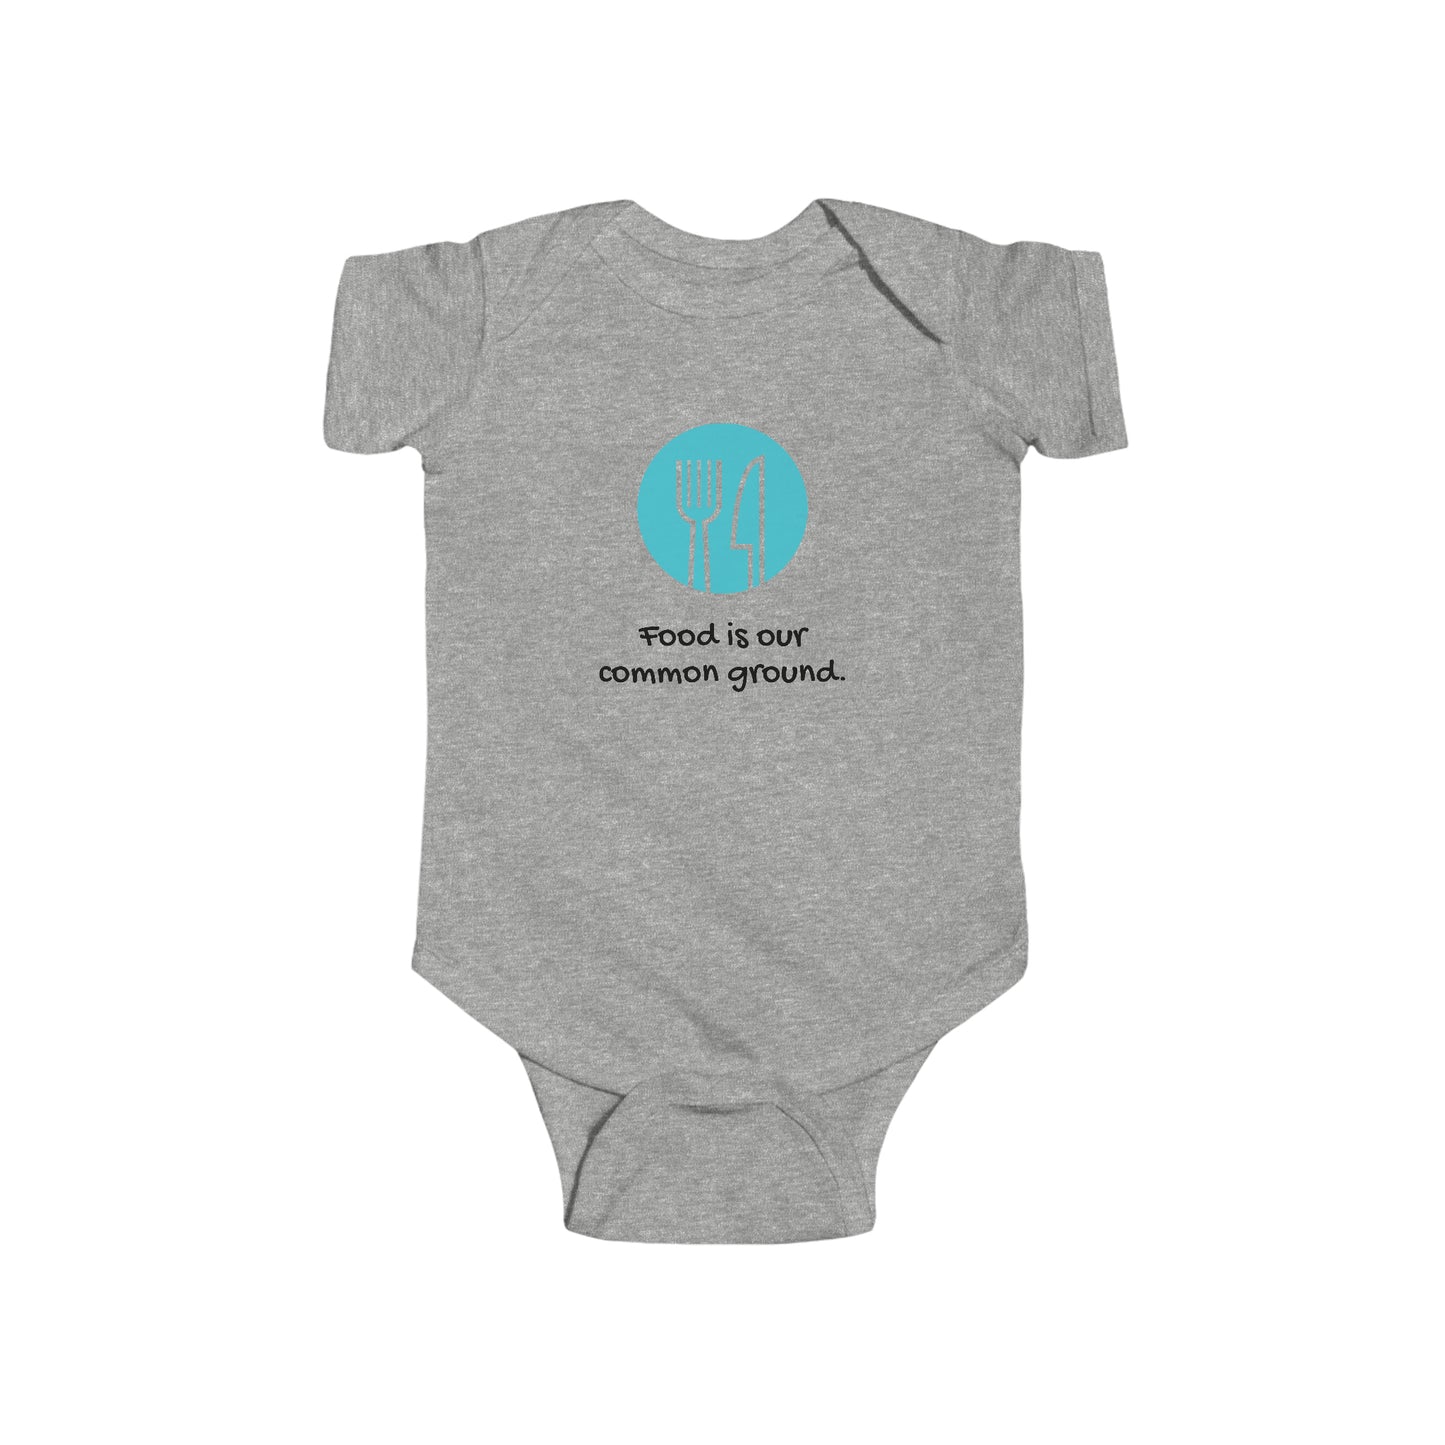 Infant Fine Jersey Bodysuit - Food is our common ground